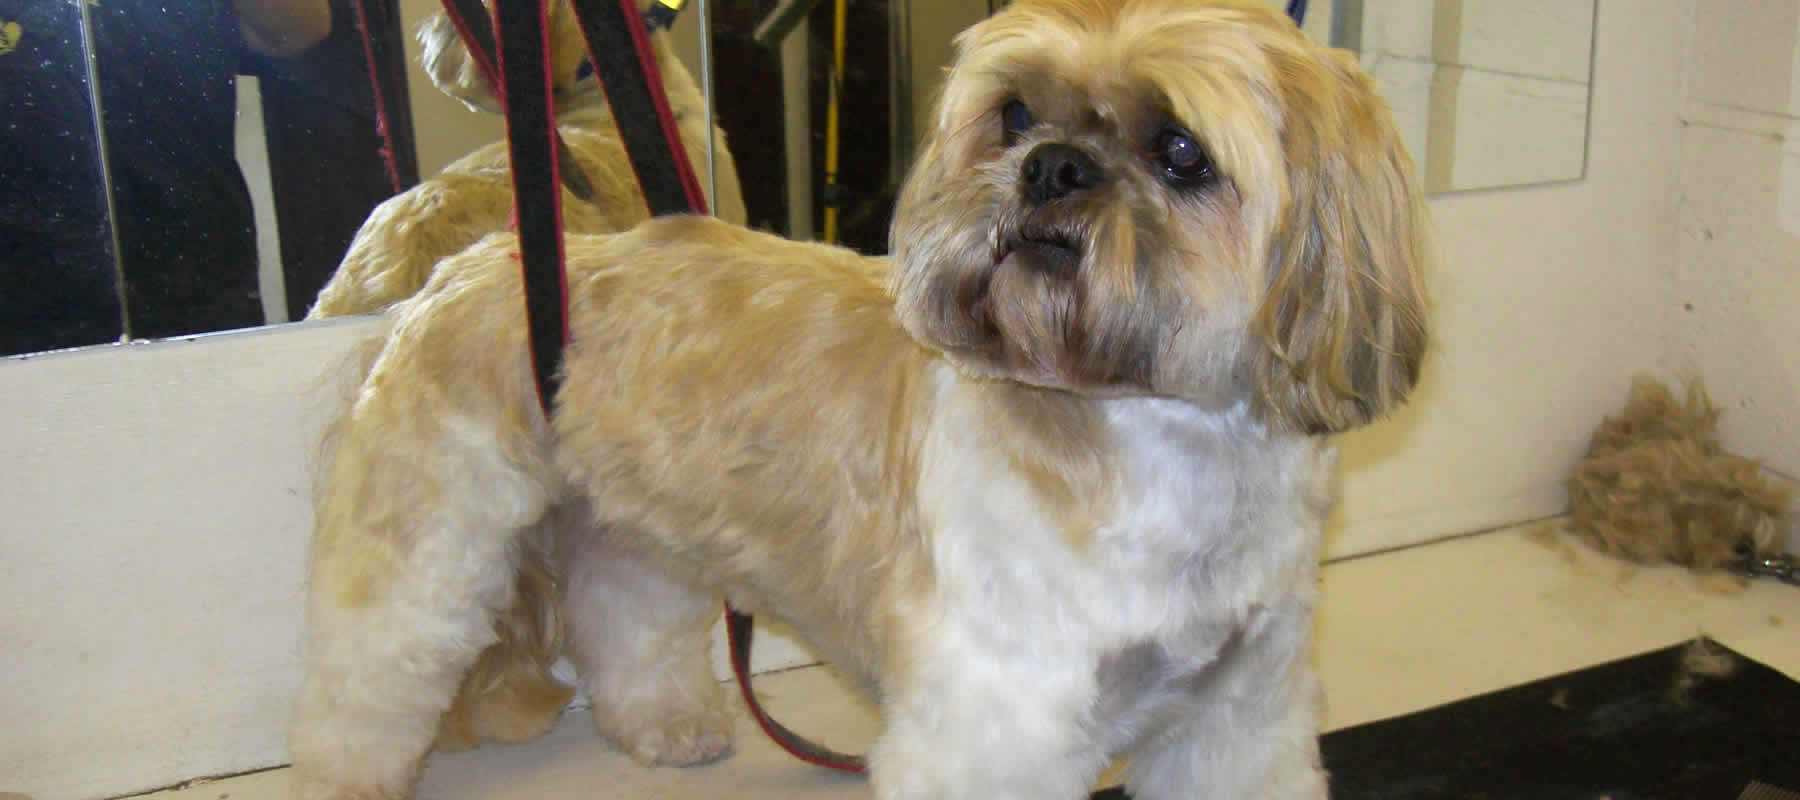 Dapper Dogs Professional Dog Grooming in Cheadle Dog Groomers Cheadle